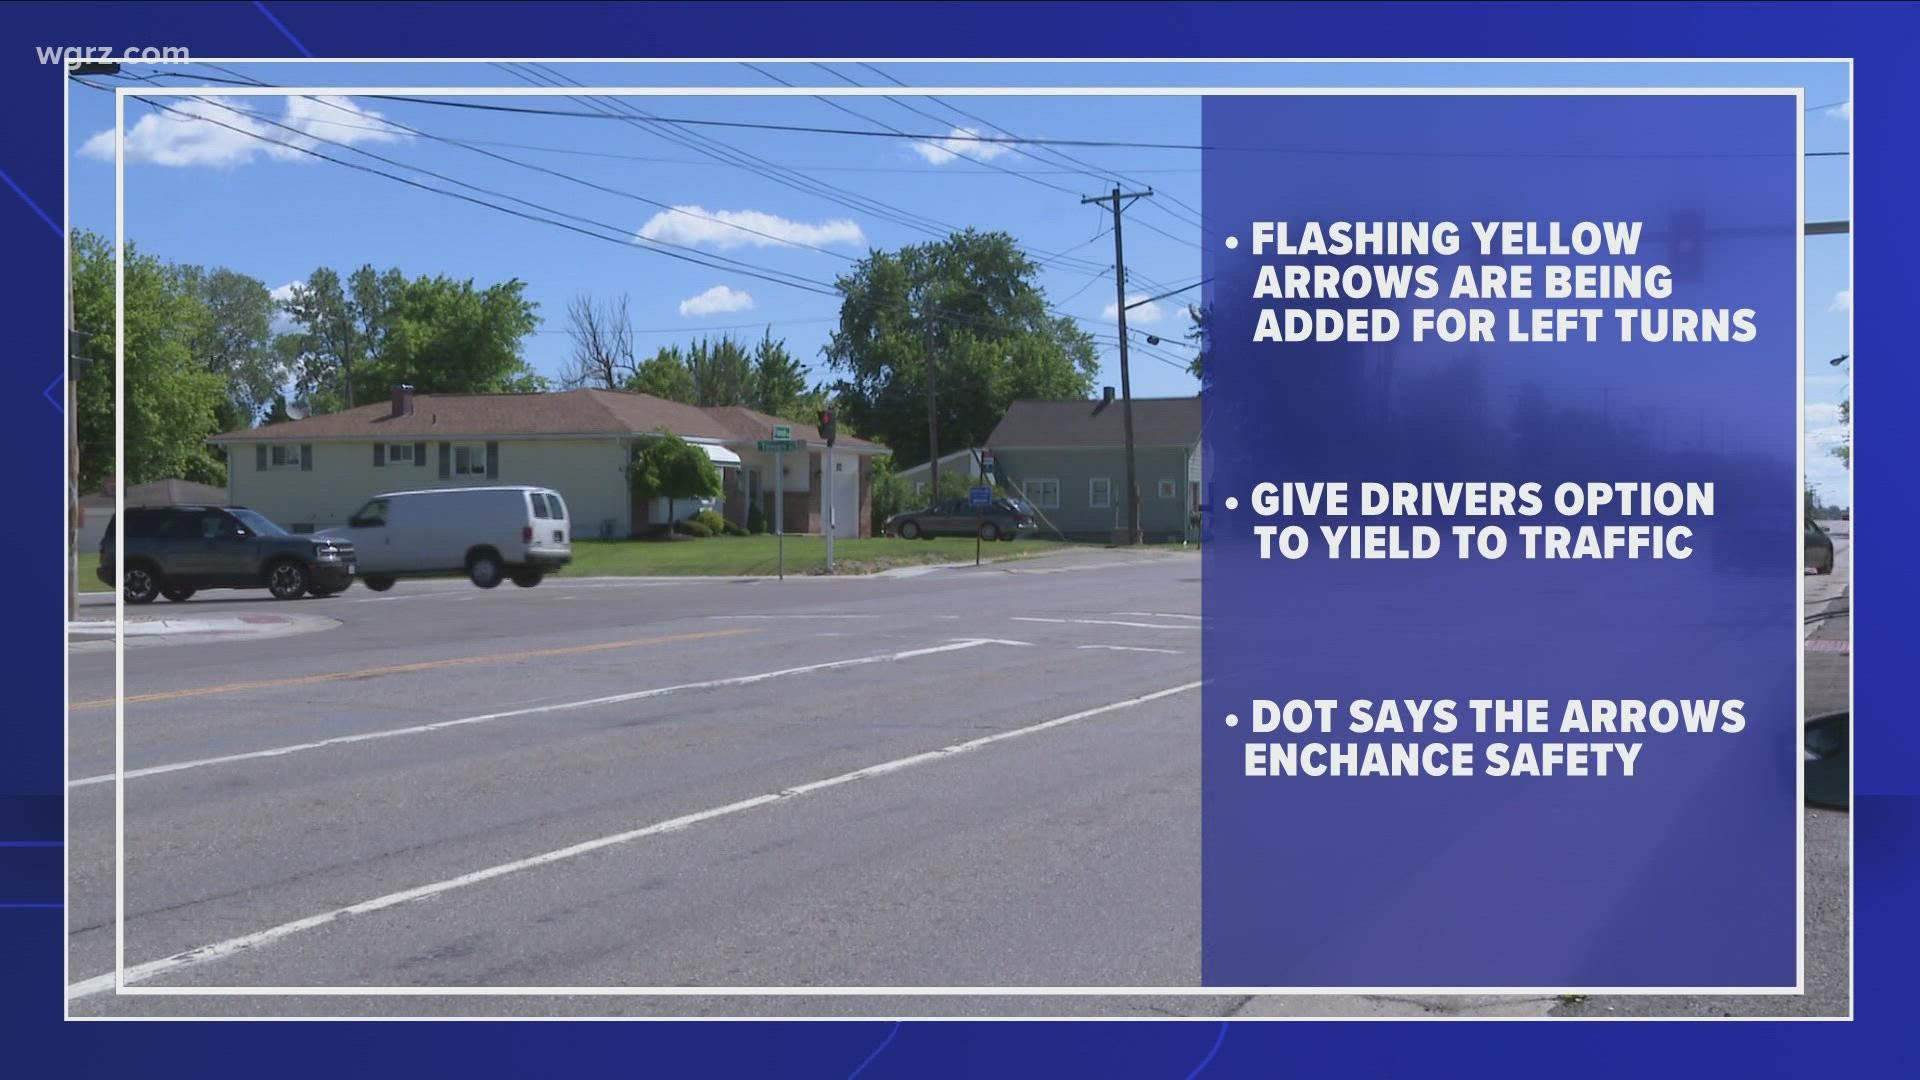 The department of transportation says more flashing yellow arrows are being added for left turns.